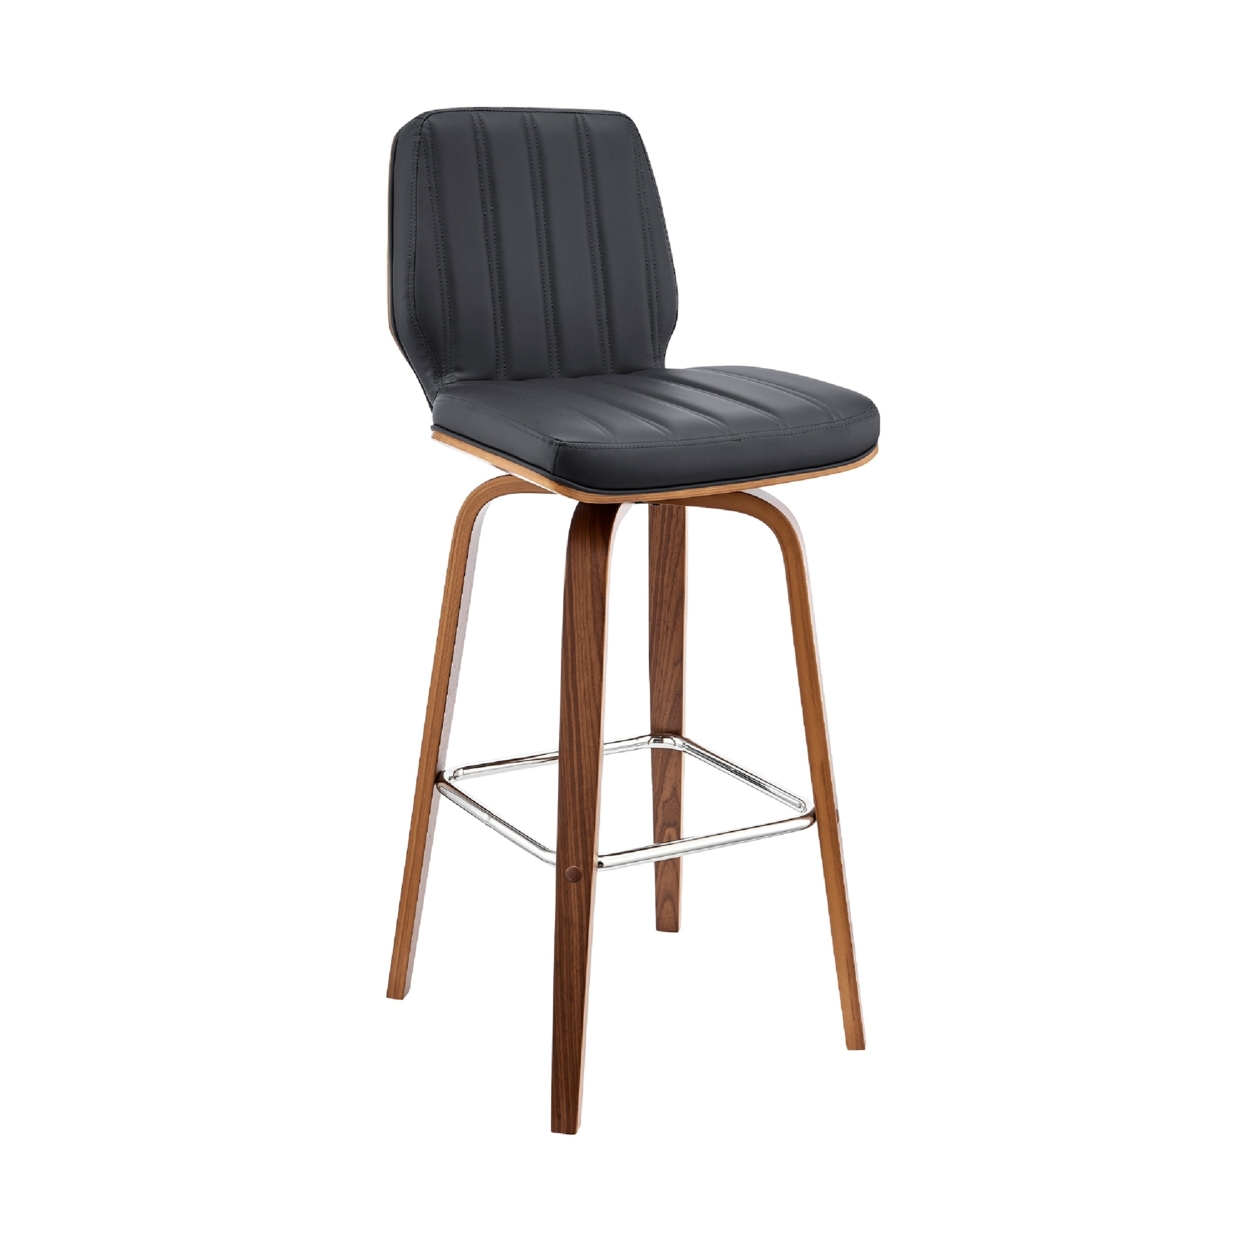 Swivel Barstool With Channel Stitching And Wooden Support, Brown And Black- Saltoro Sherpi